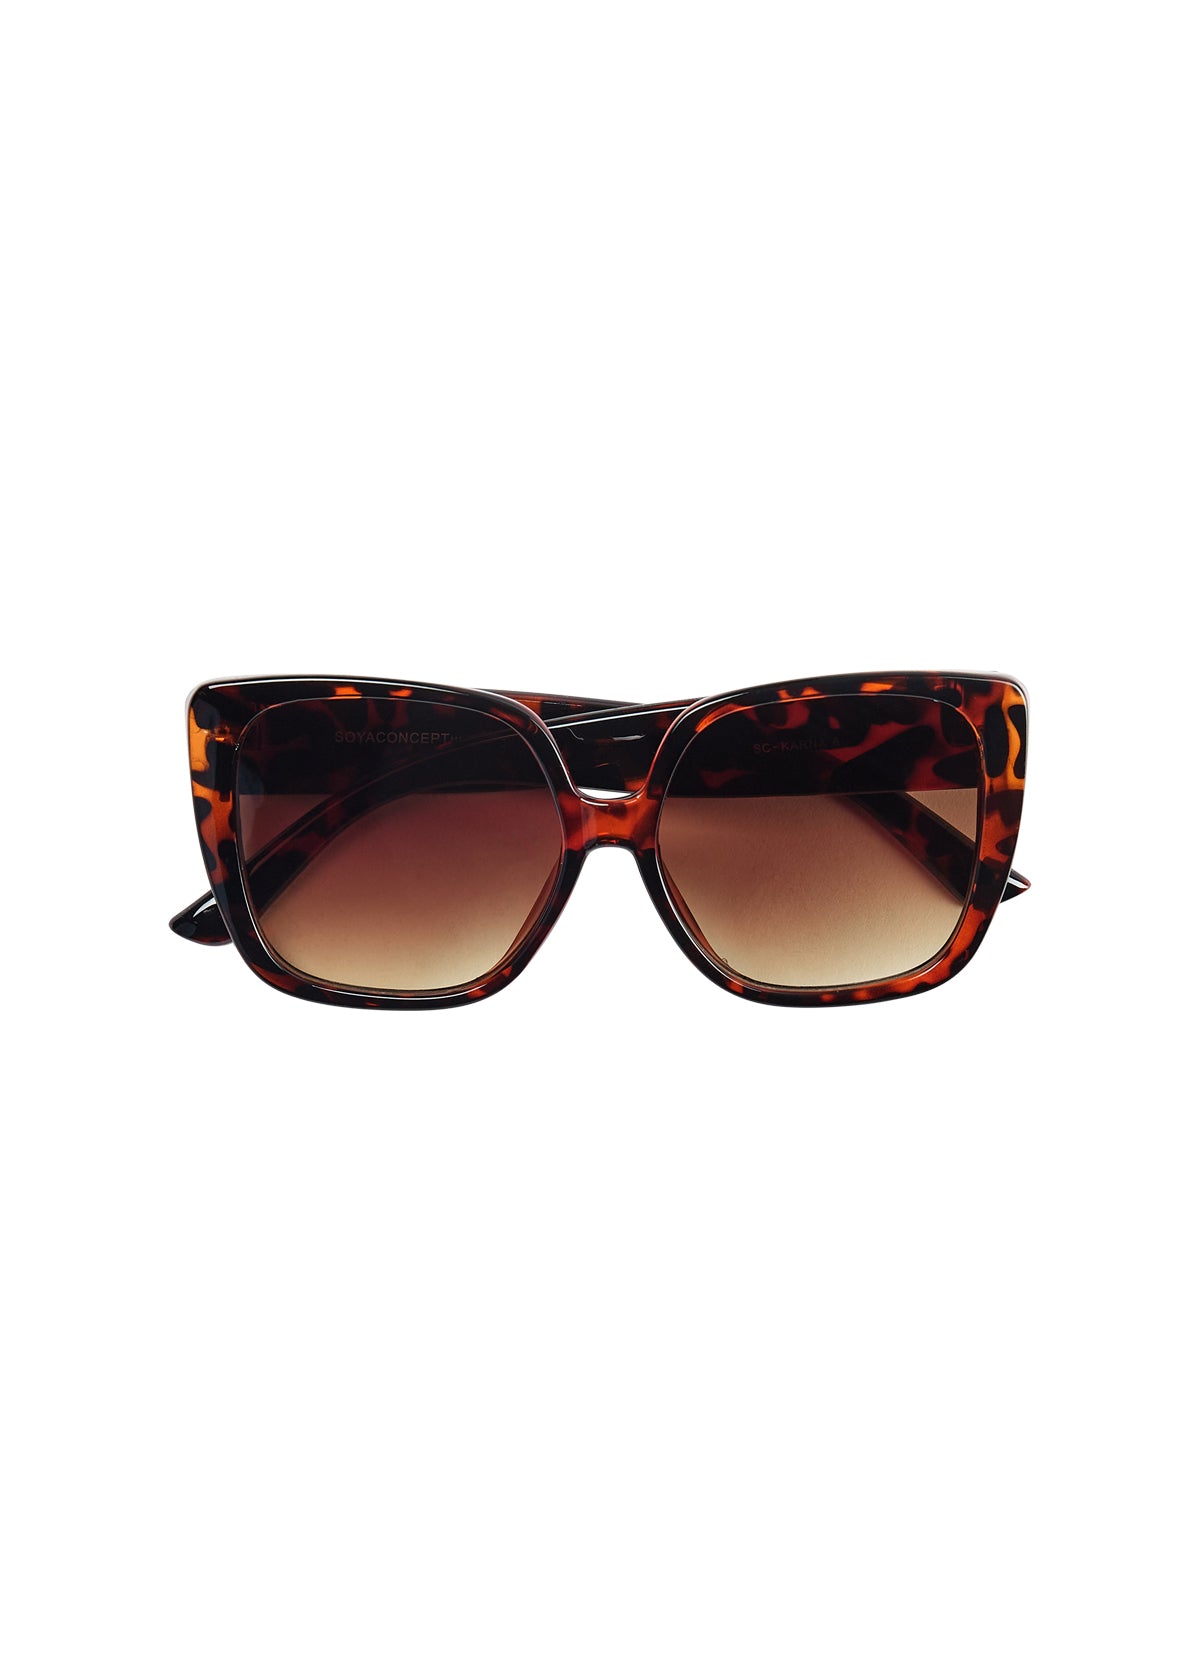 Soya Concept Sunglasses in Animal Print Large